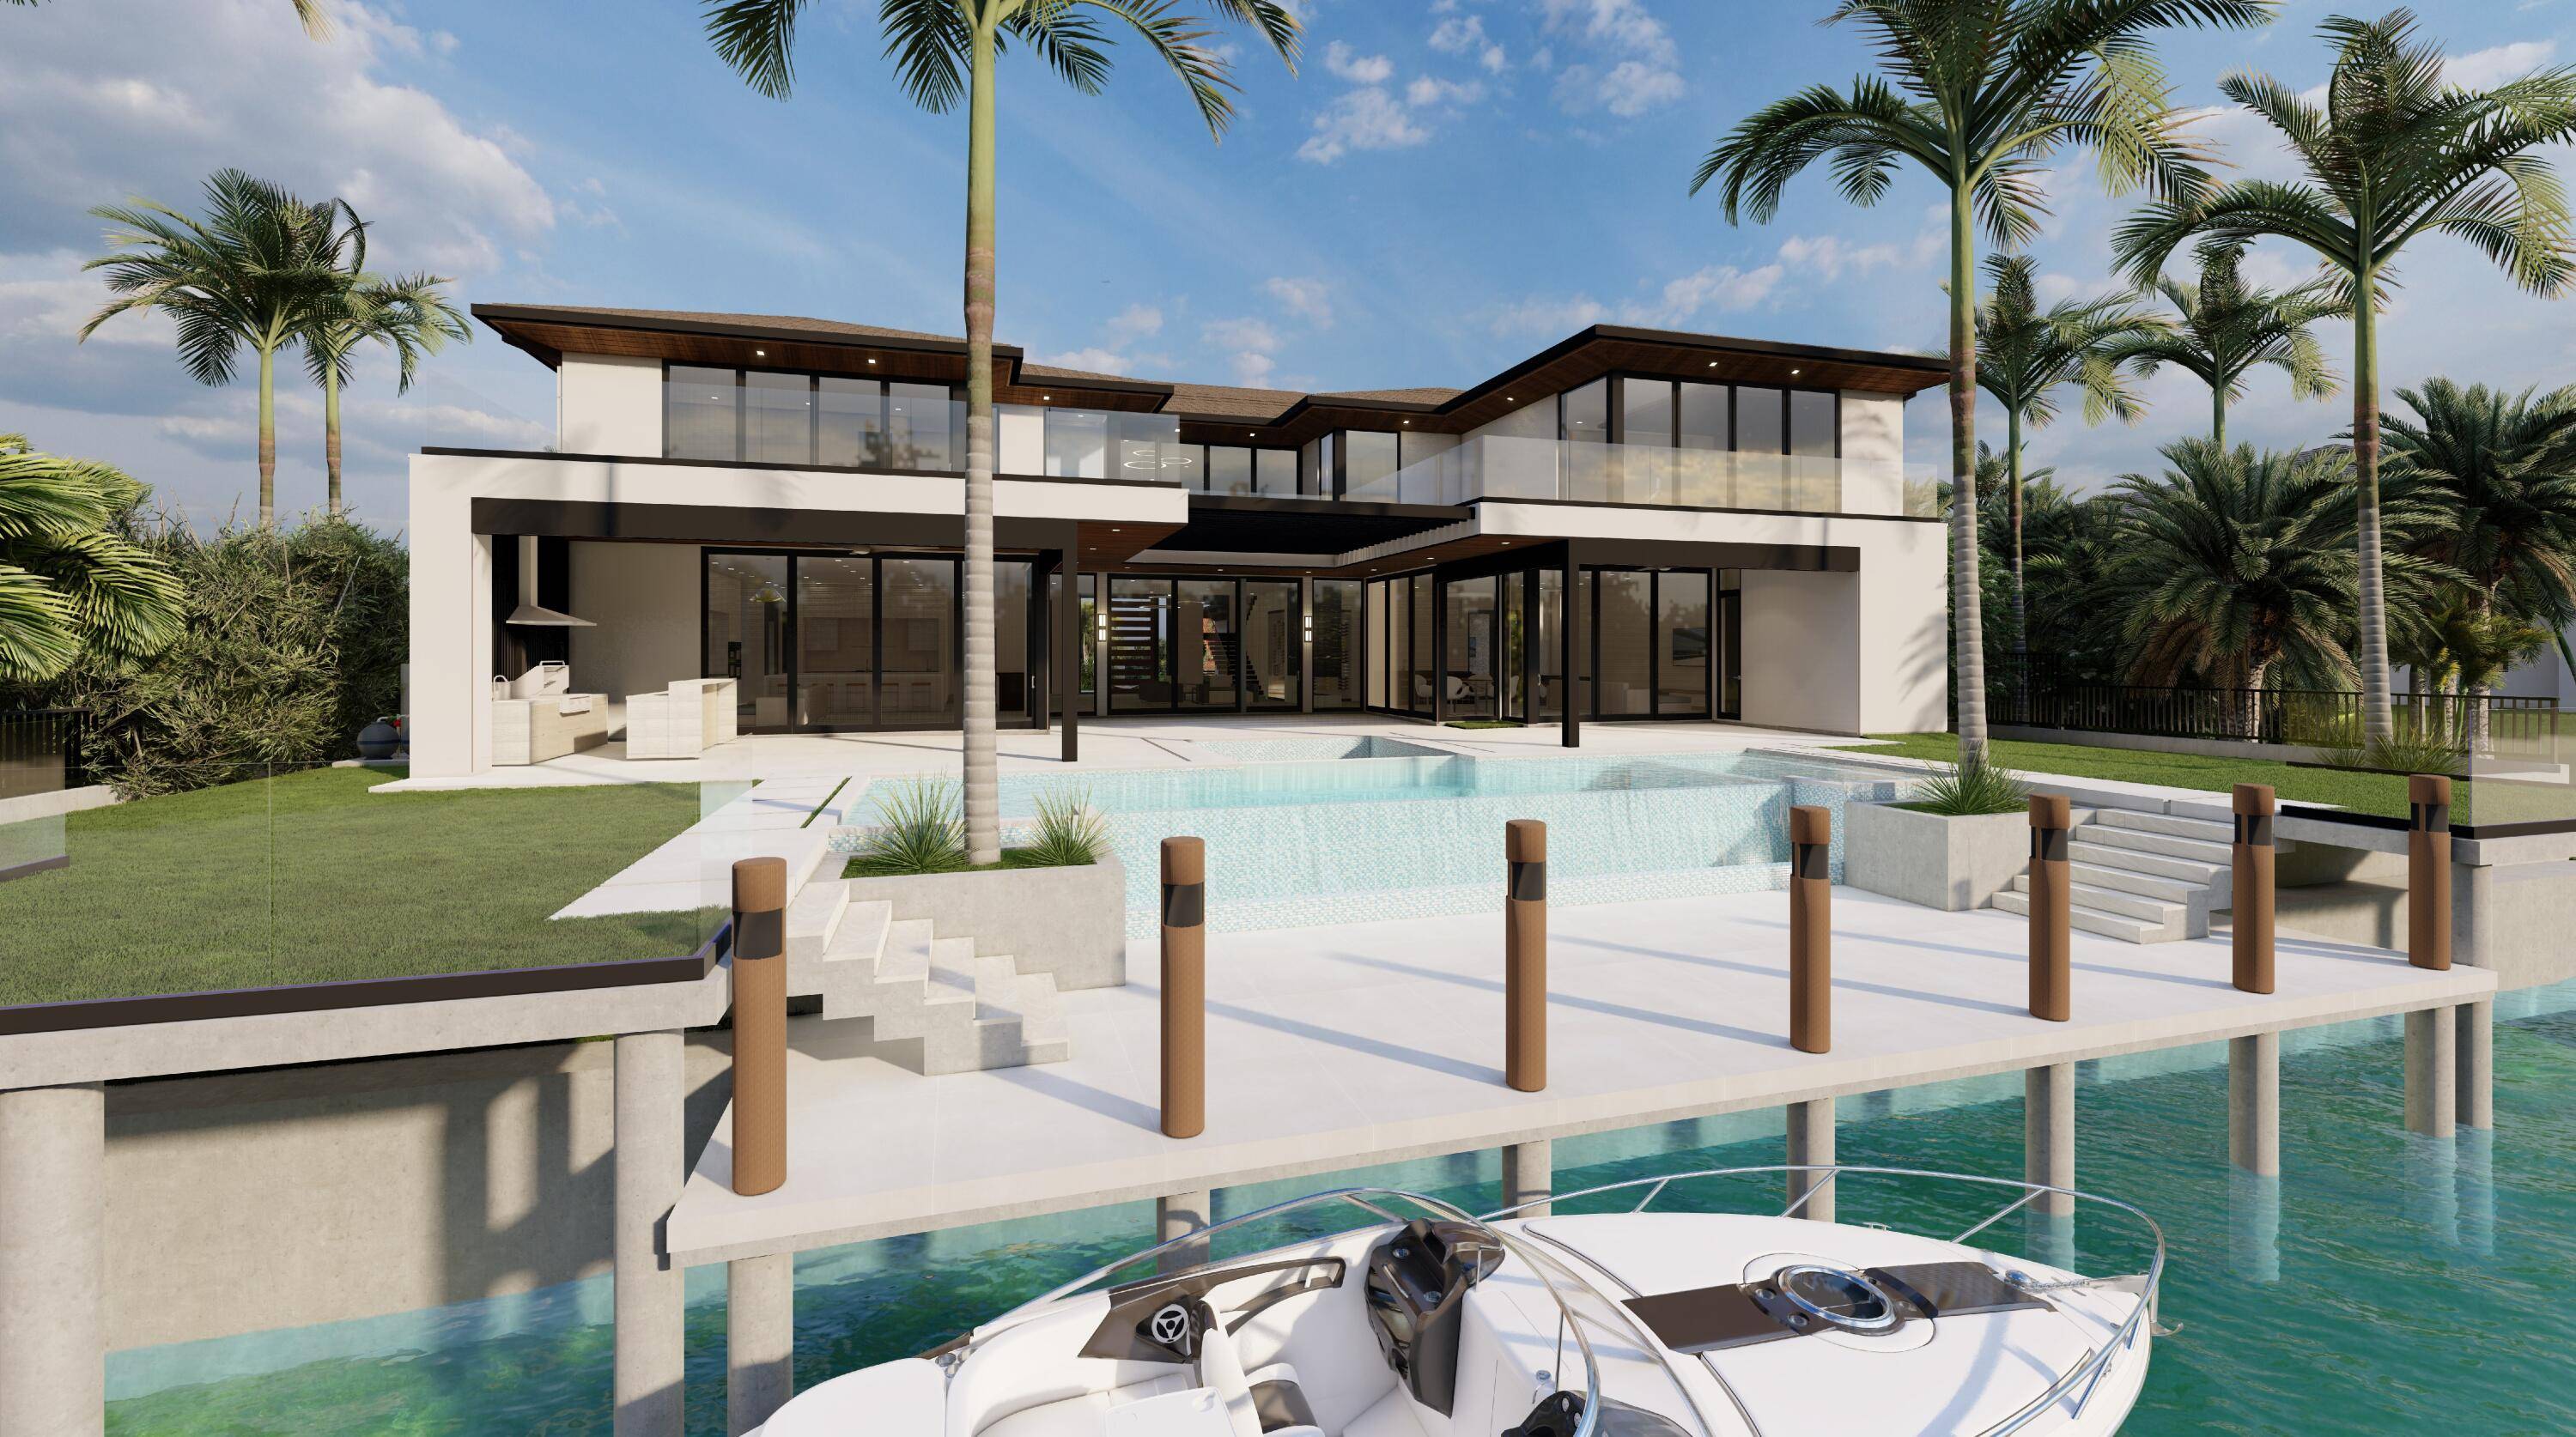 212 W Alexander Palm Rd, Brand New Sleek Contemporary Waterfront Masterpiece sits on 100 Ft on the Royal Palm Waterway in Boca Raton's most Prestigious Community, Royal Palm Yacht CC.